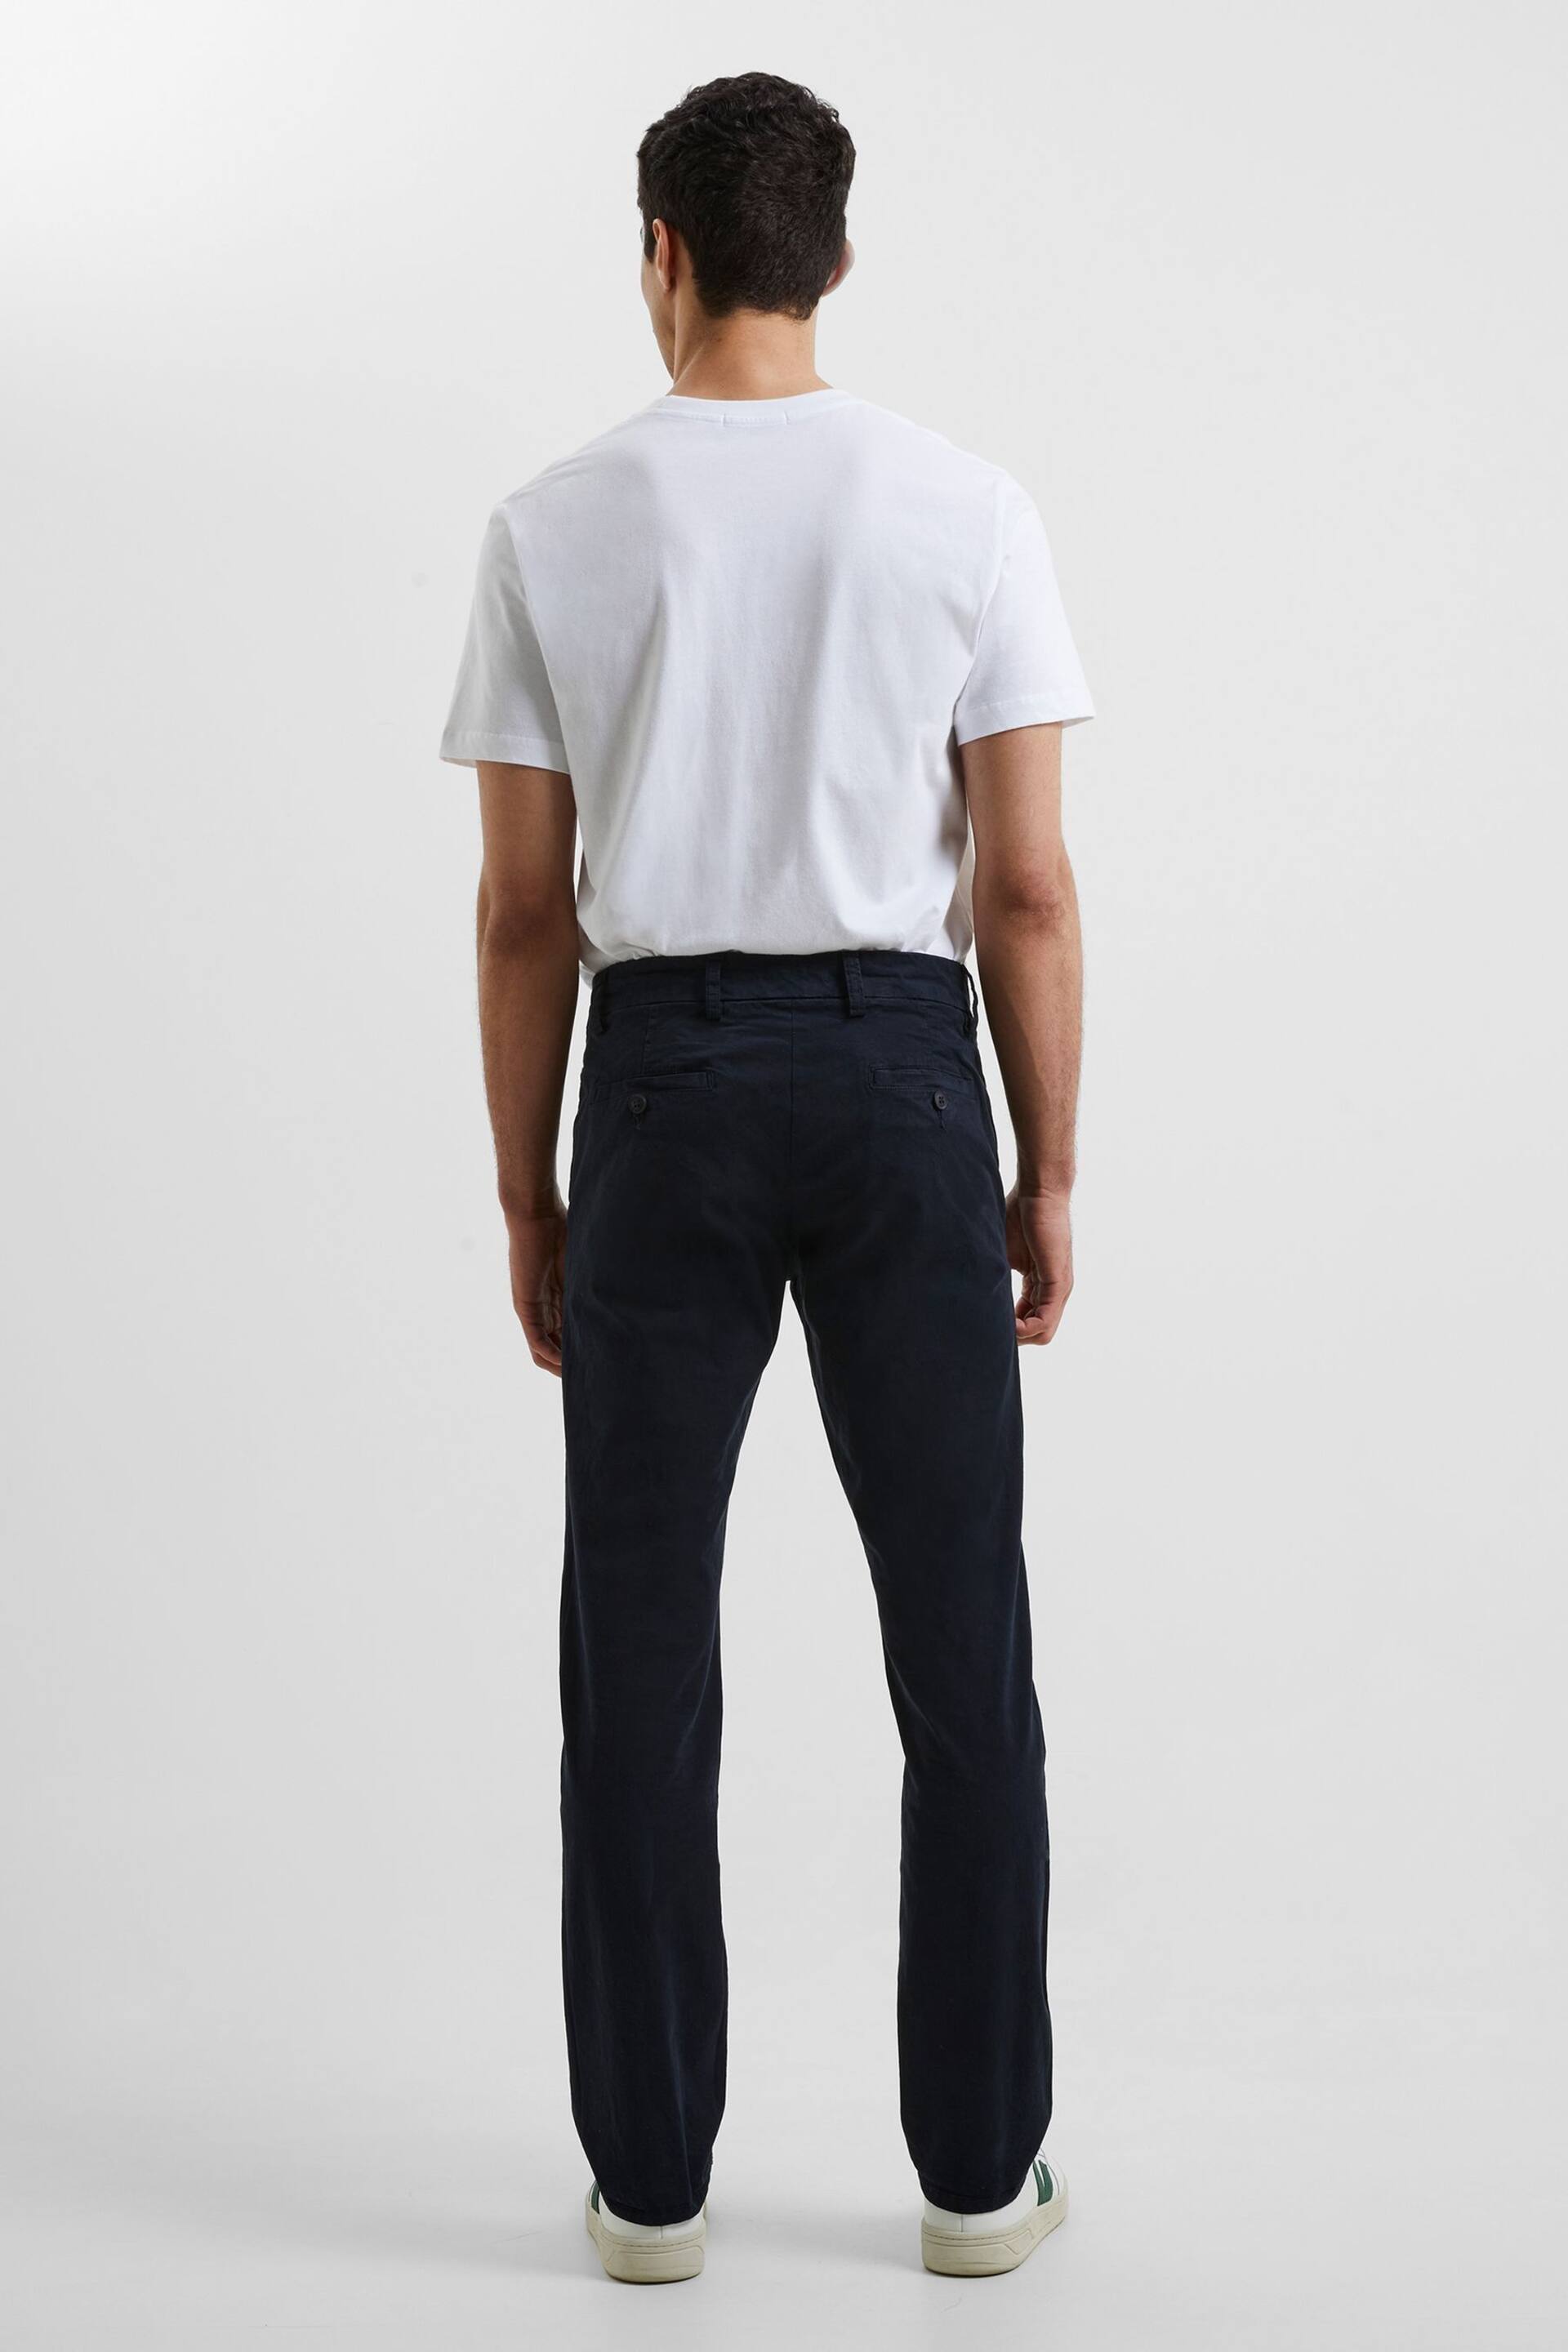 French Connection Blue Stretch Chino Trousers - Image 2 of 3